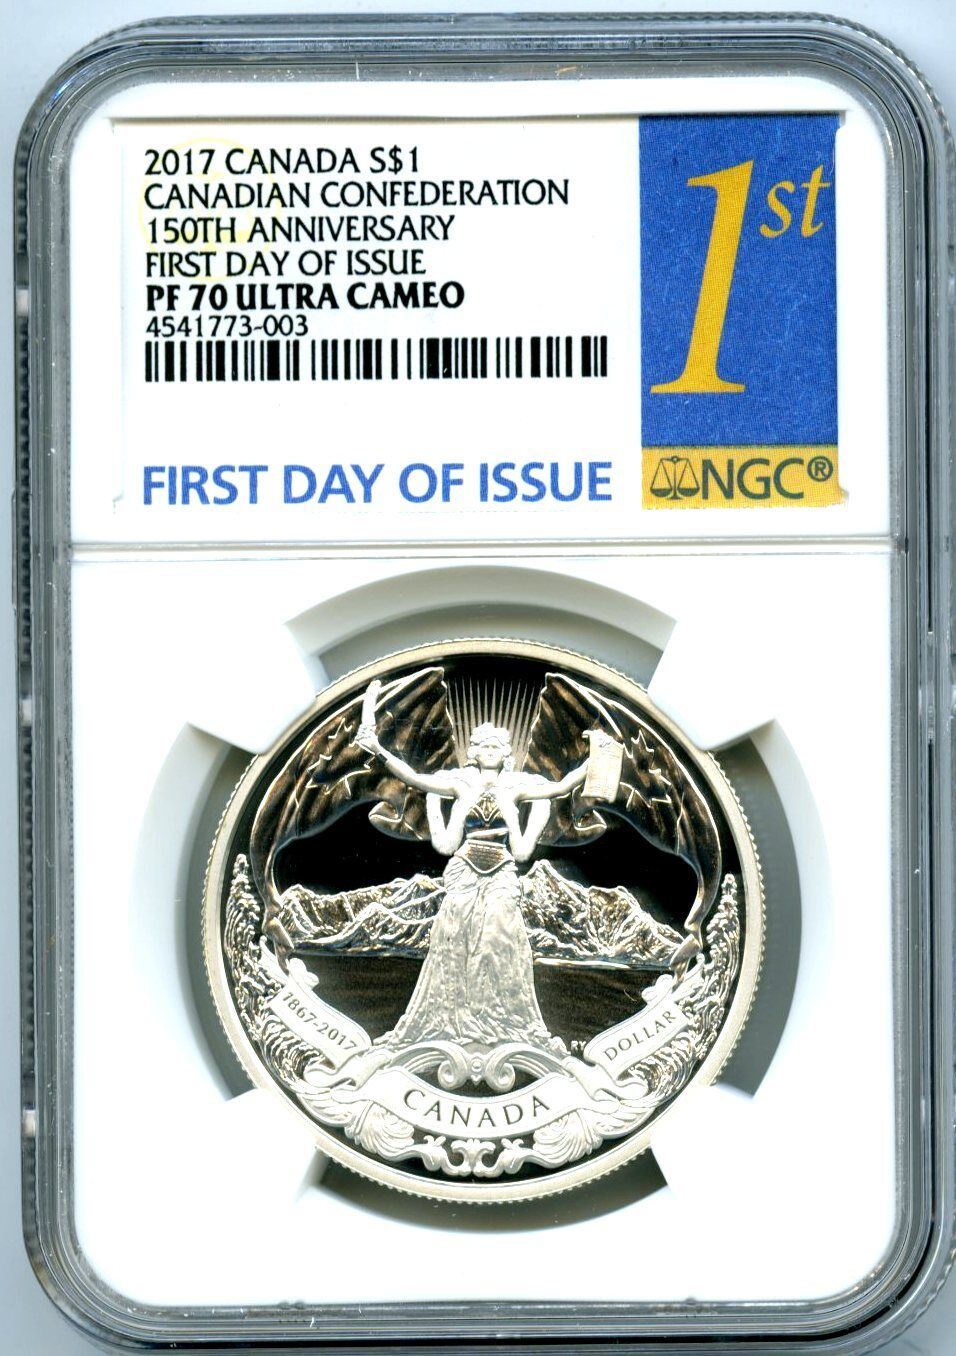 2017 CANADA $1 SILVER DOLLAR NGC PF70 150TH ANNIV CONFEDERATION FIRST DAY ISSUE